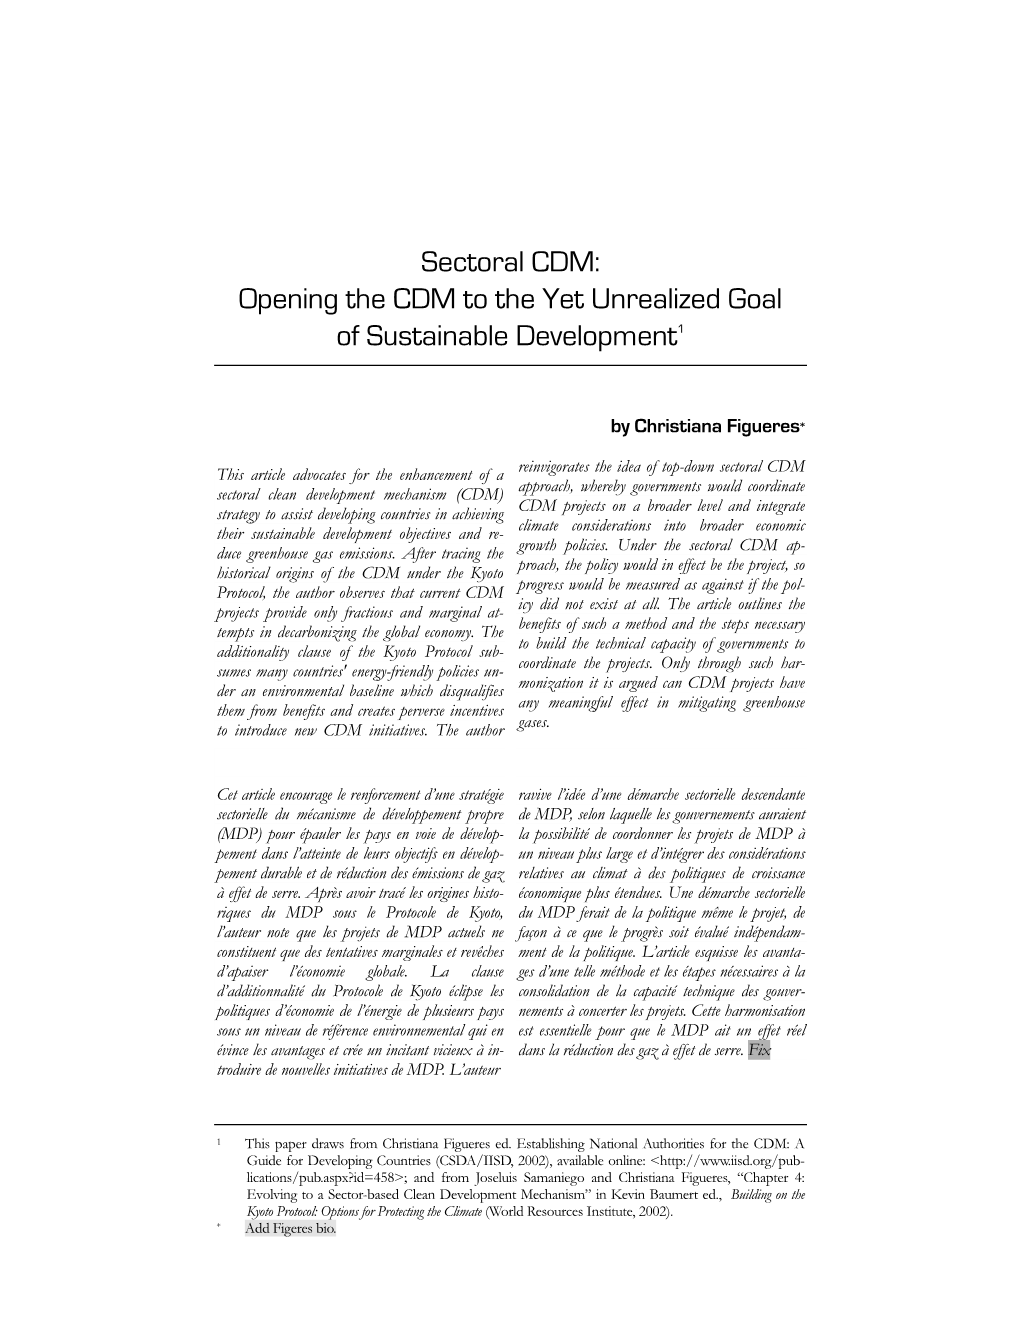 Sectoral CDM: Opening the CDM to the Yet Unrealized Goal of Sustainable Development1